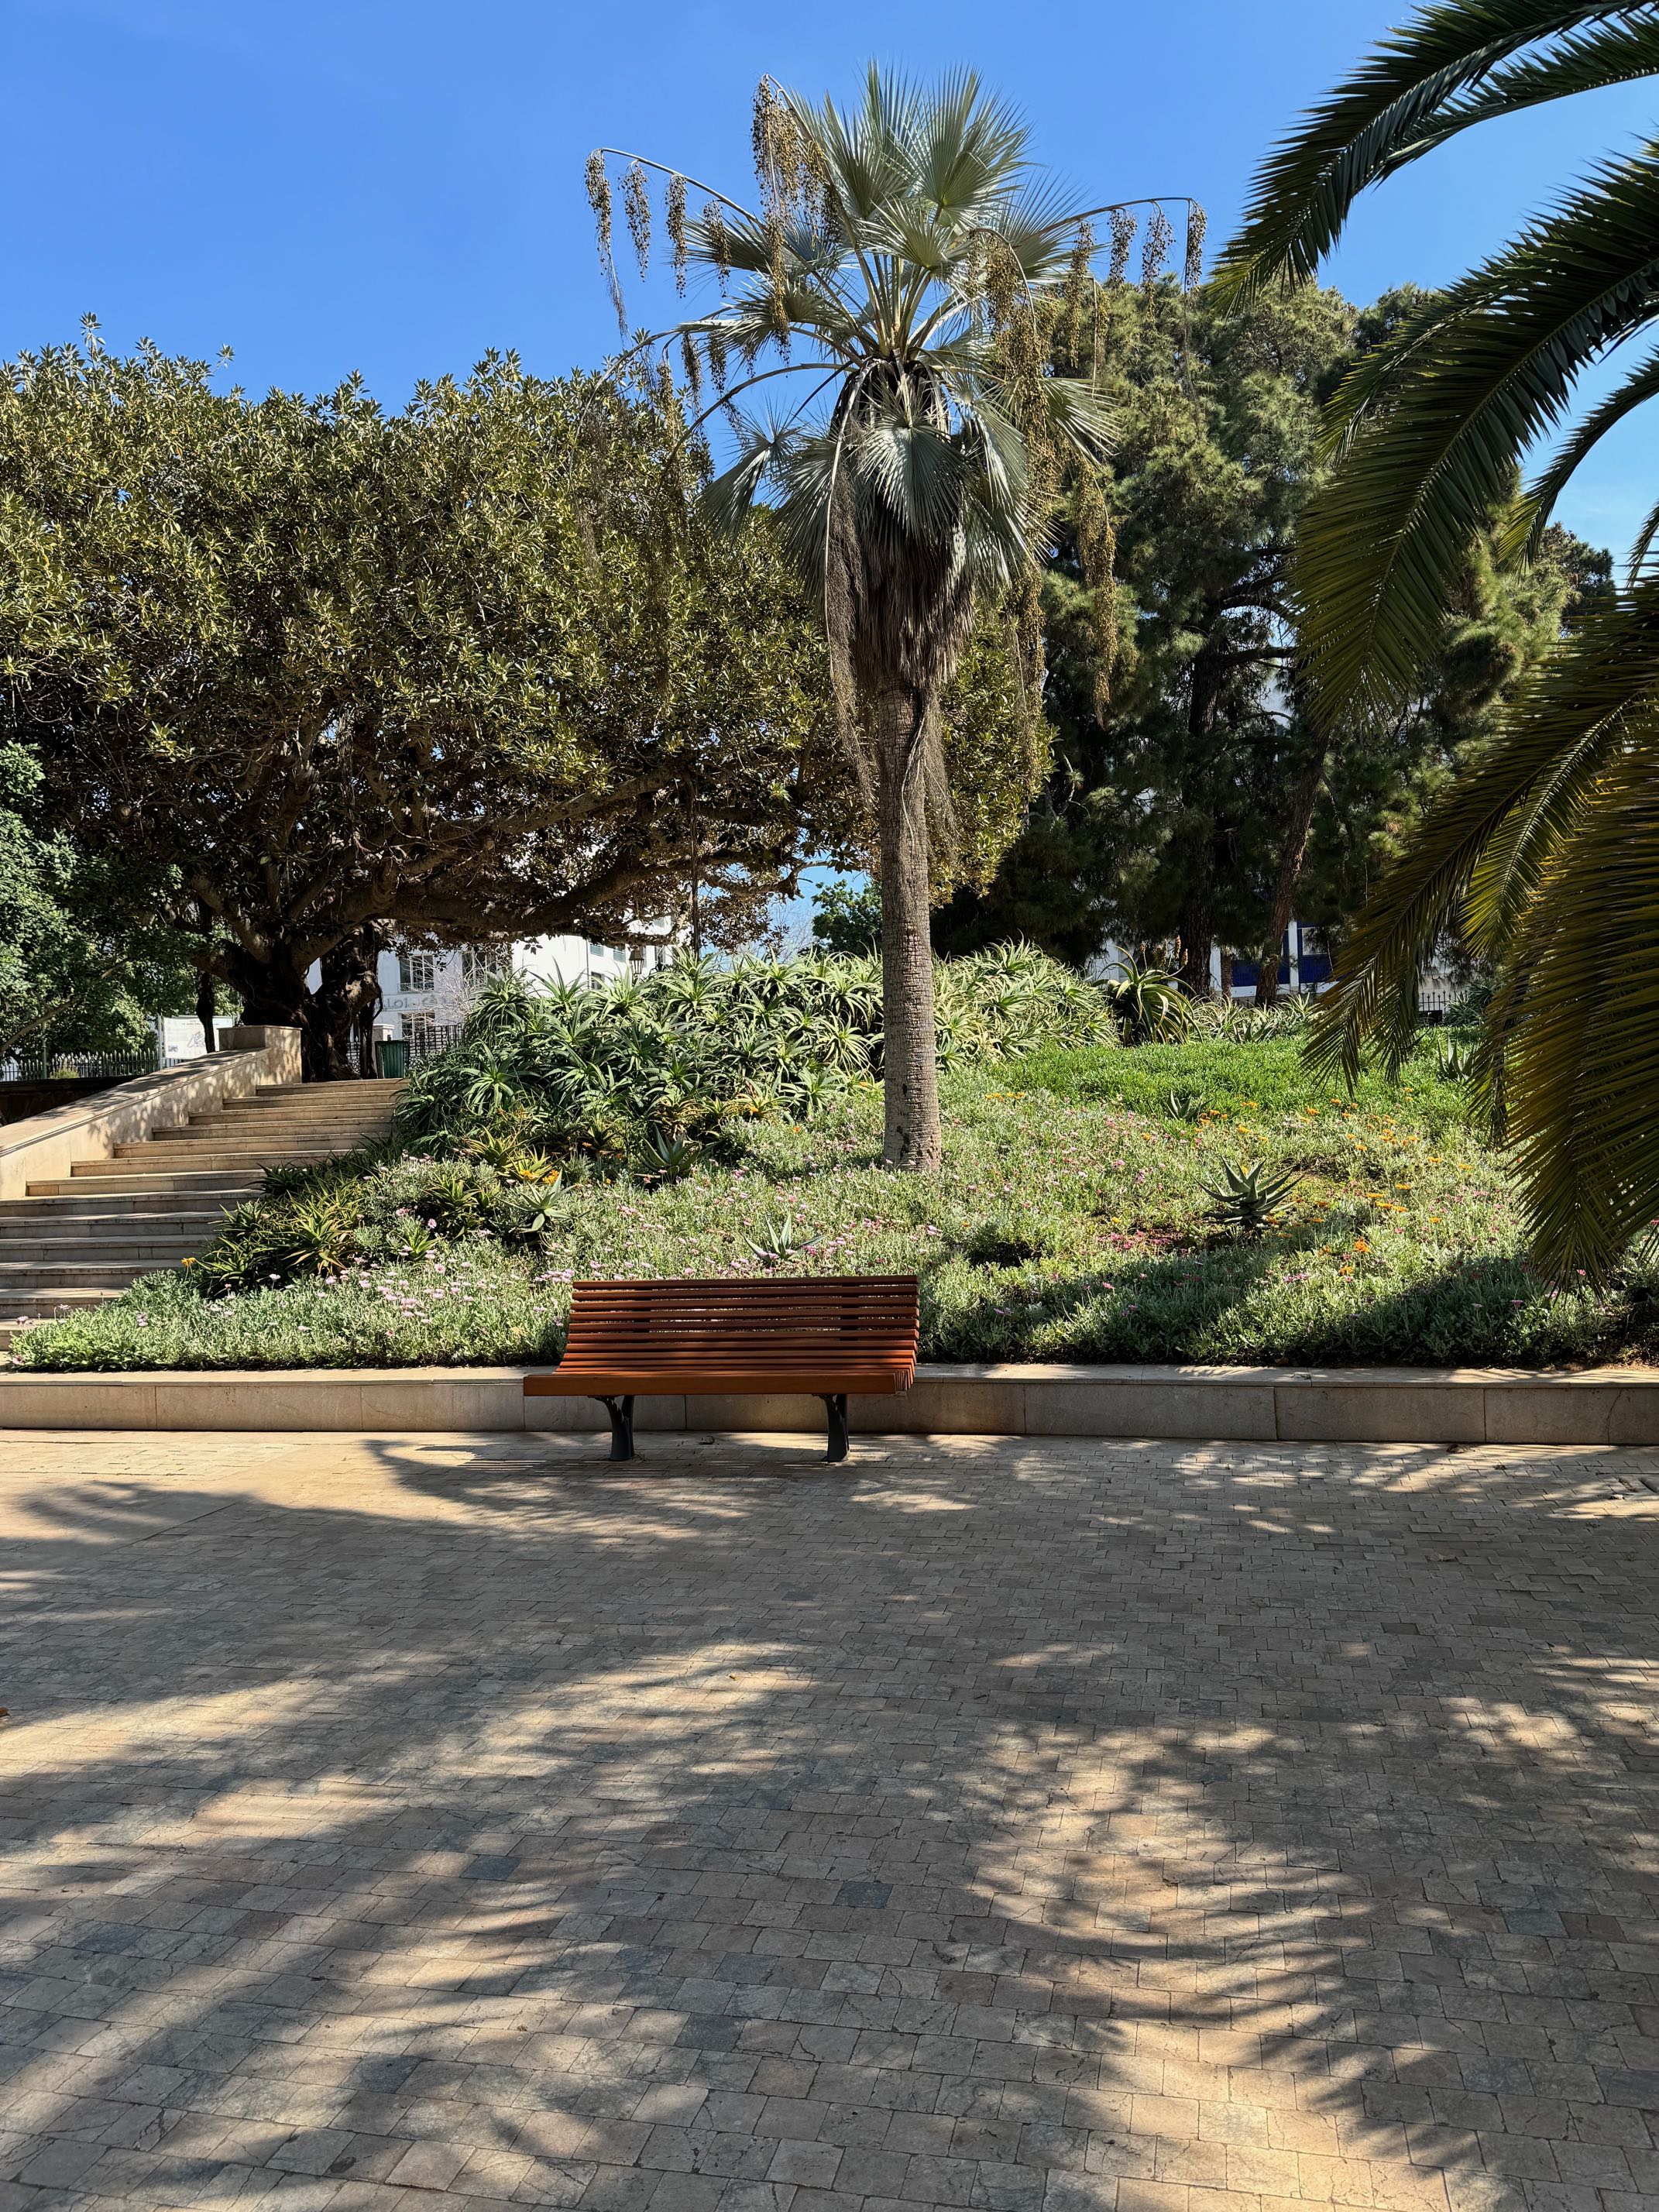 <p>View of a garden bench and palm tree on the brickwork path</p>